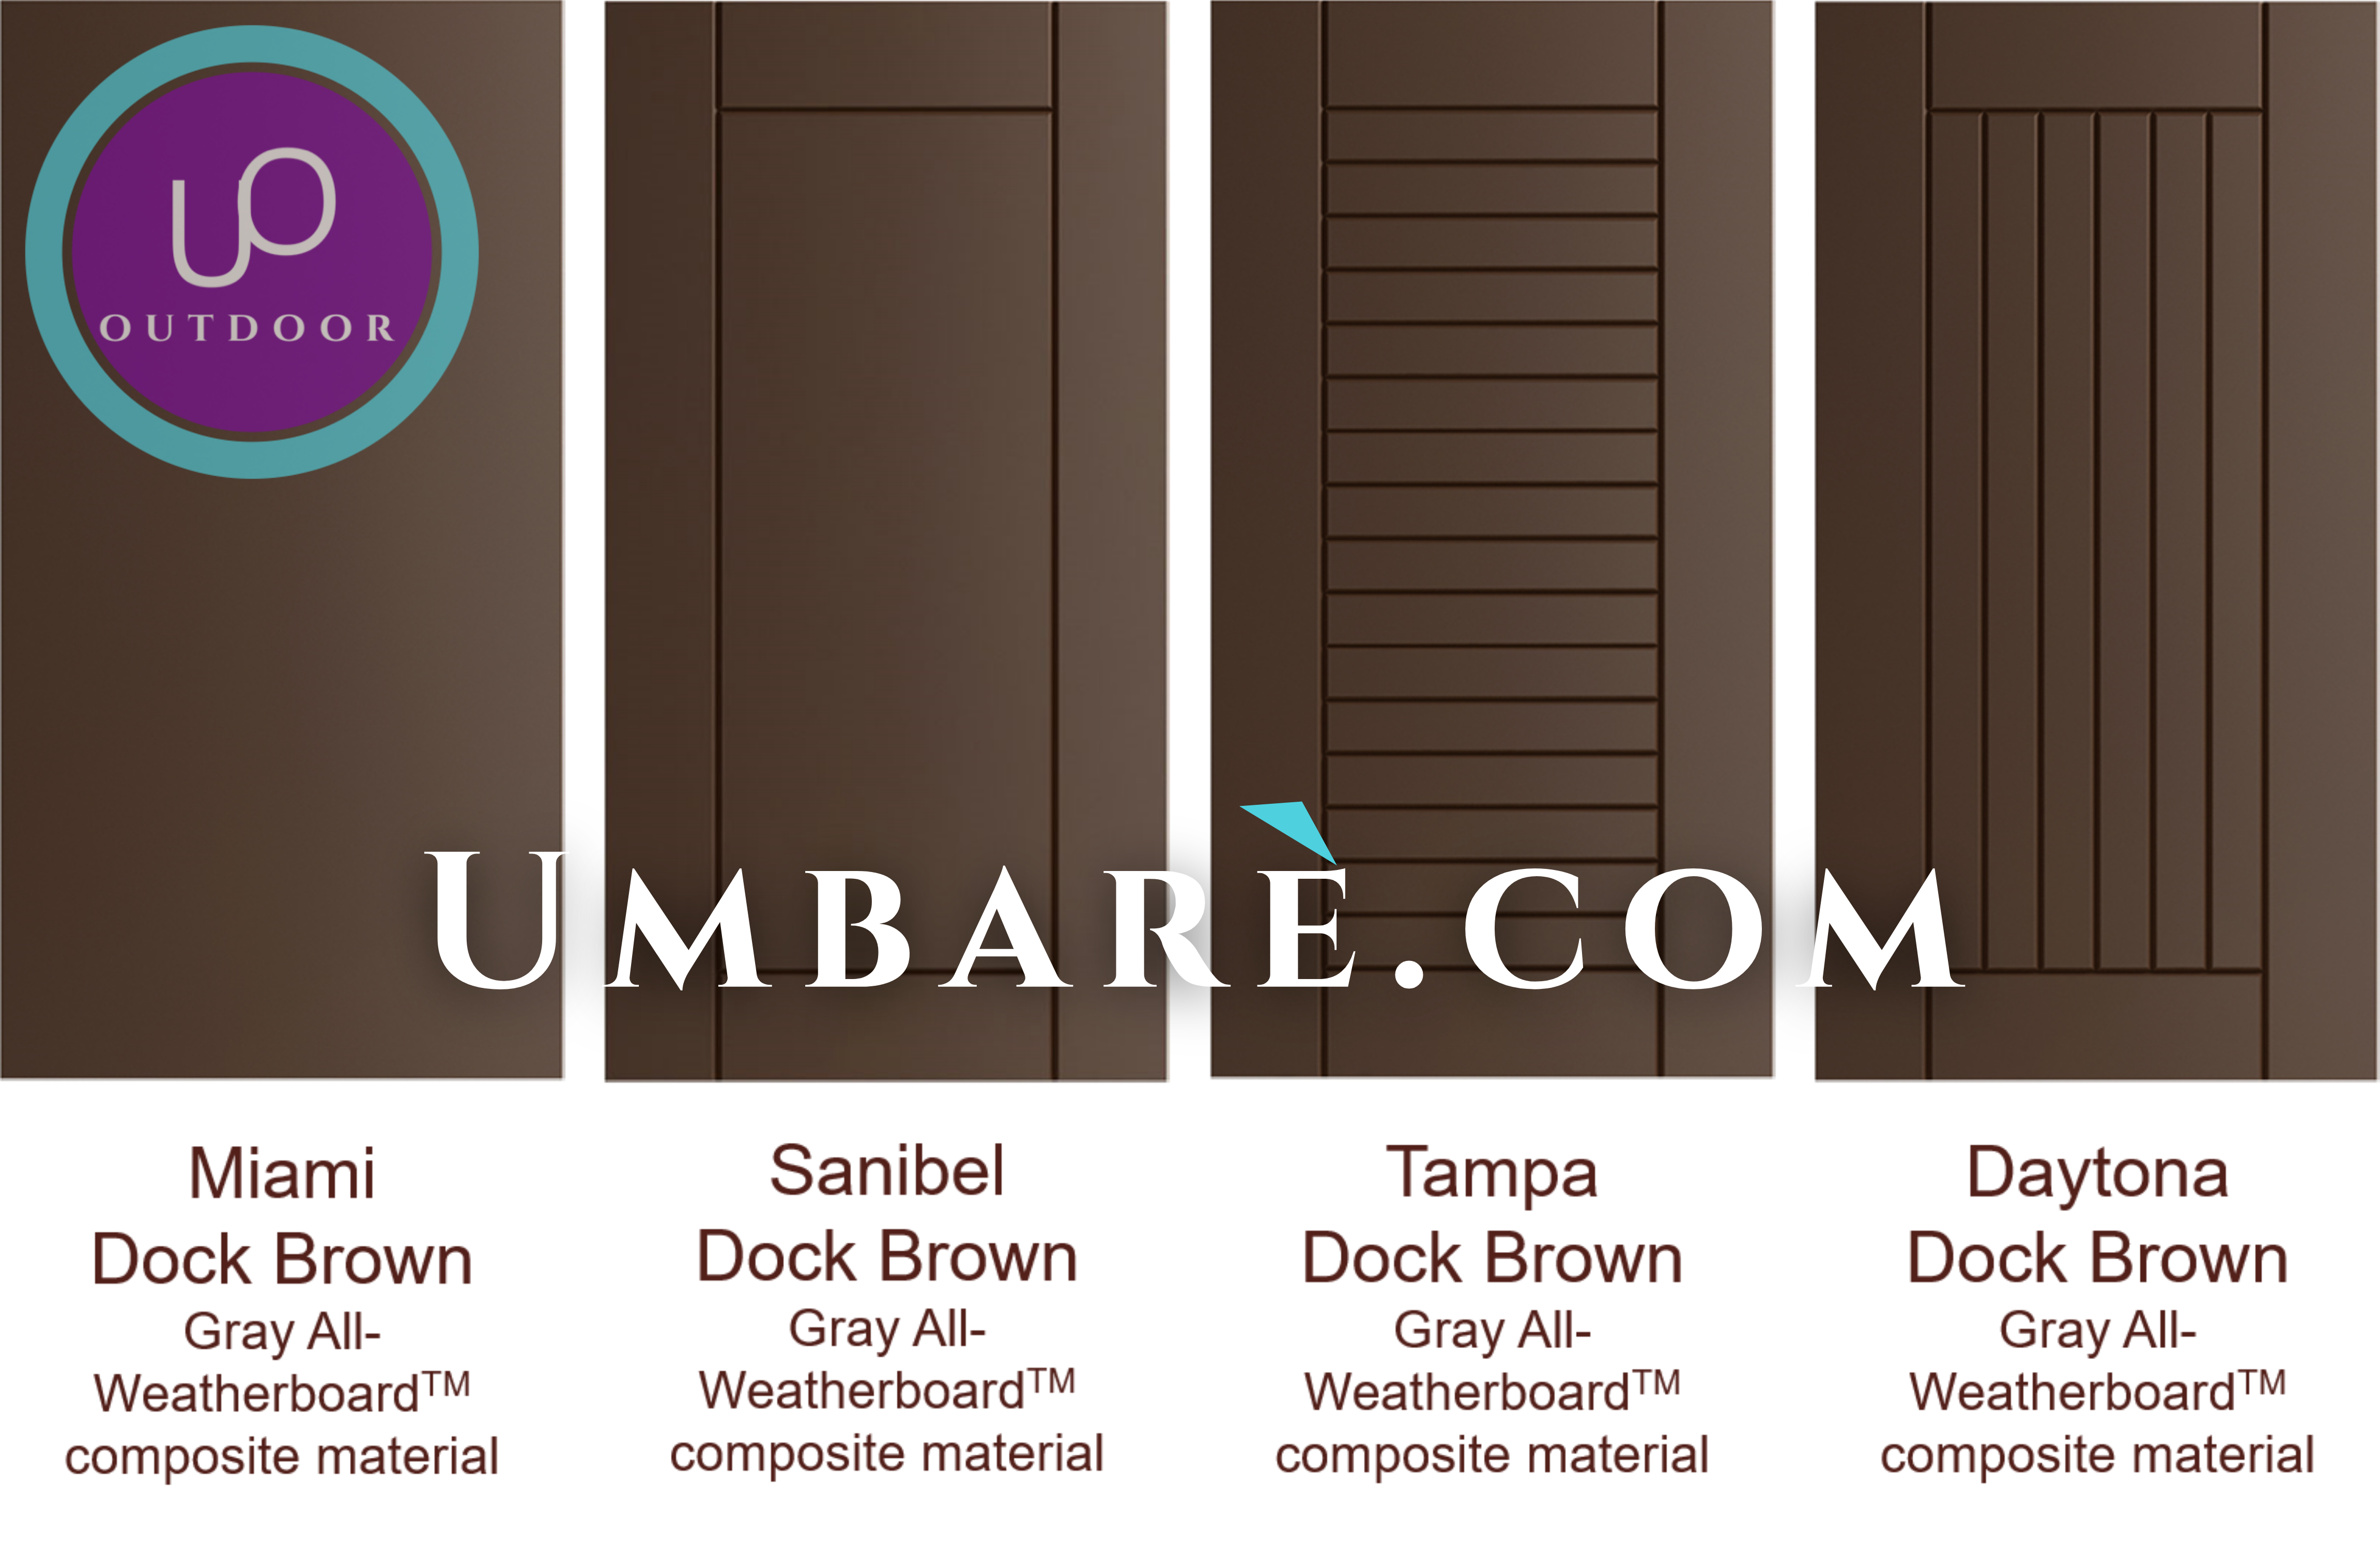 Outdoor Cabinets Sarasota Outdoor Cabinets Lakewood Ranch Outdoor Cabinets Longboat Key Outdoor Cabinets Venice Outdoor Cabinets Siesta Key